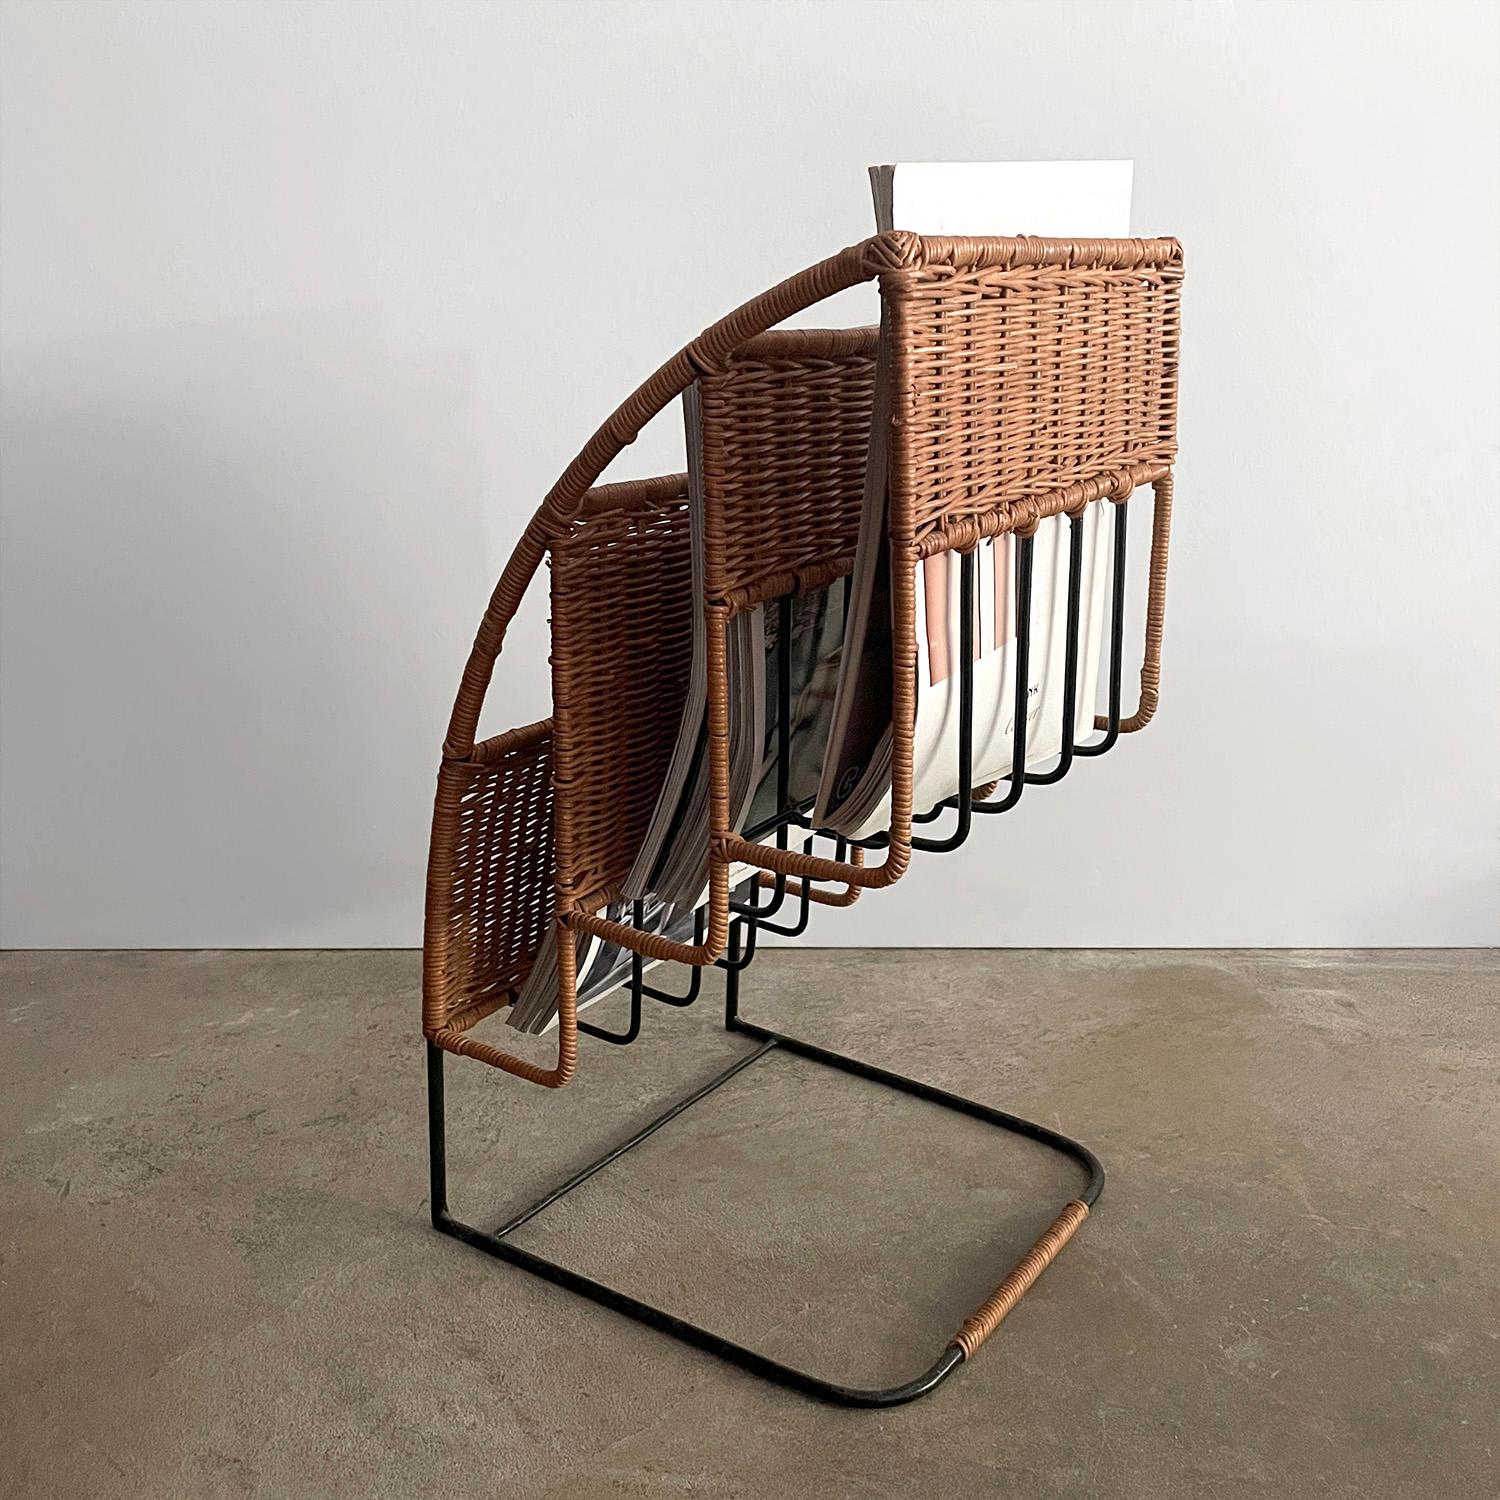 French Wicker & Iron Tiered Magazine Stand in the style of Jacques Adnet  For Sale 6